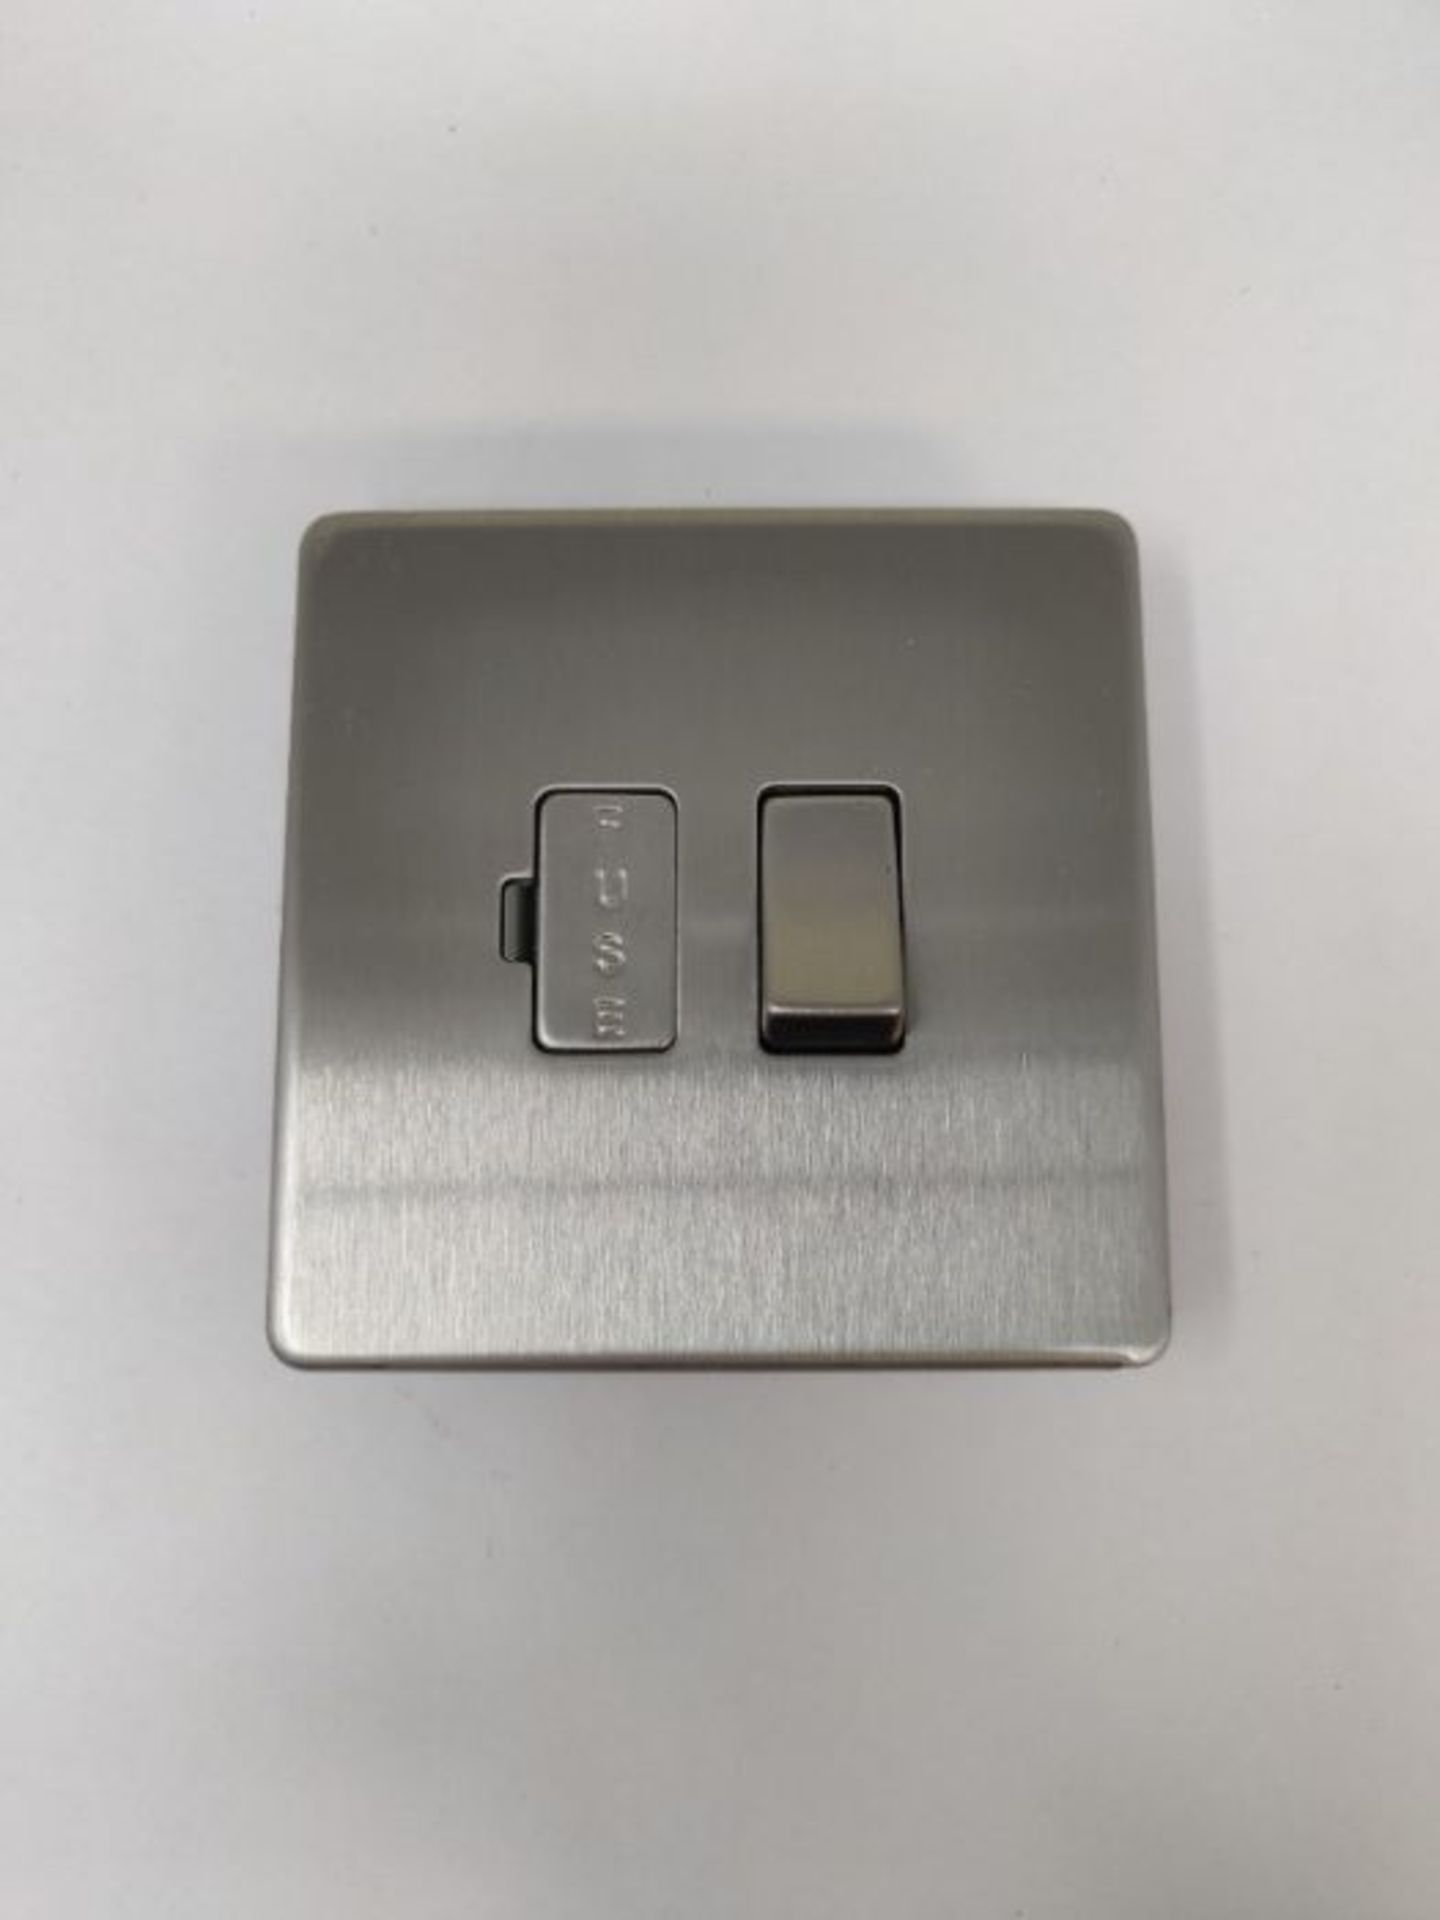 BG Electrical Screwless Flat Plate Switched Fused Connection Unit, Brushed Steel, 13 A - Image 3 of 3